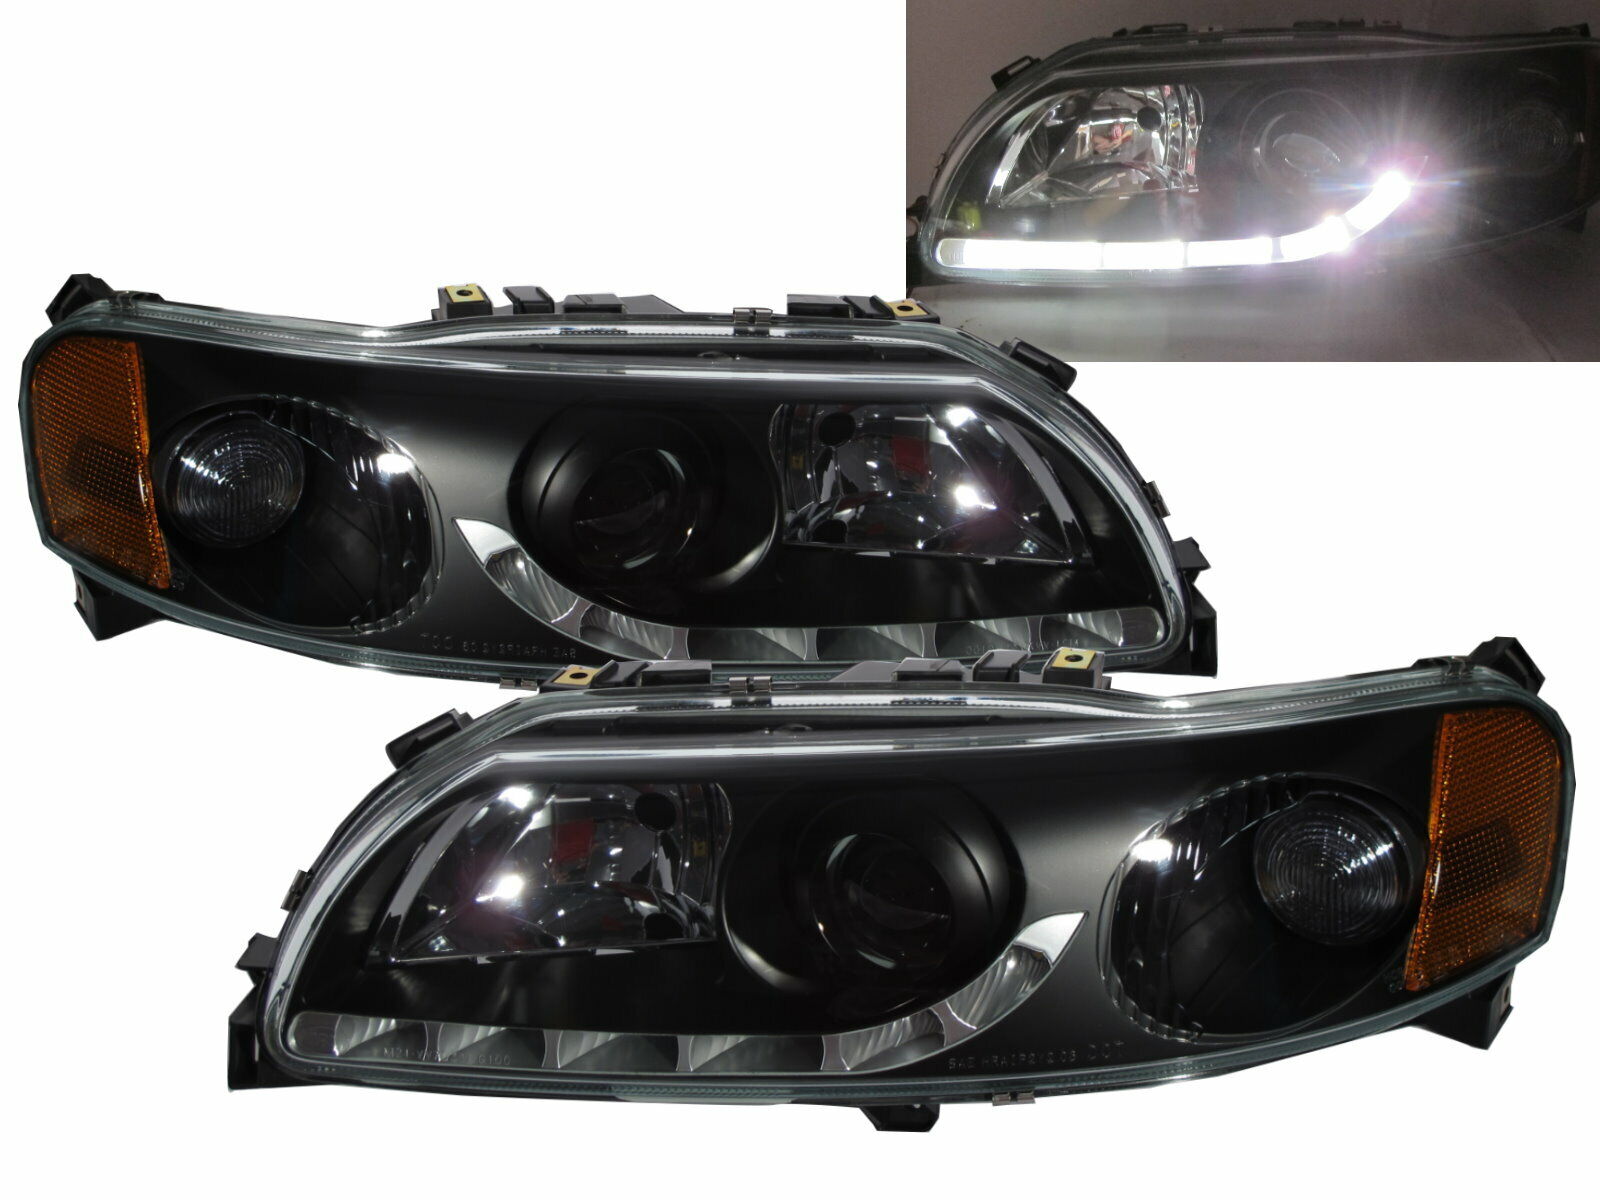 S60 MK1 00-04 PRE-FACELIFT 4D/5D Projector R8Look Headlight Black for VOLVO LHD